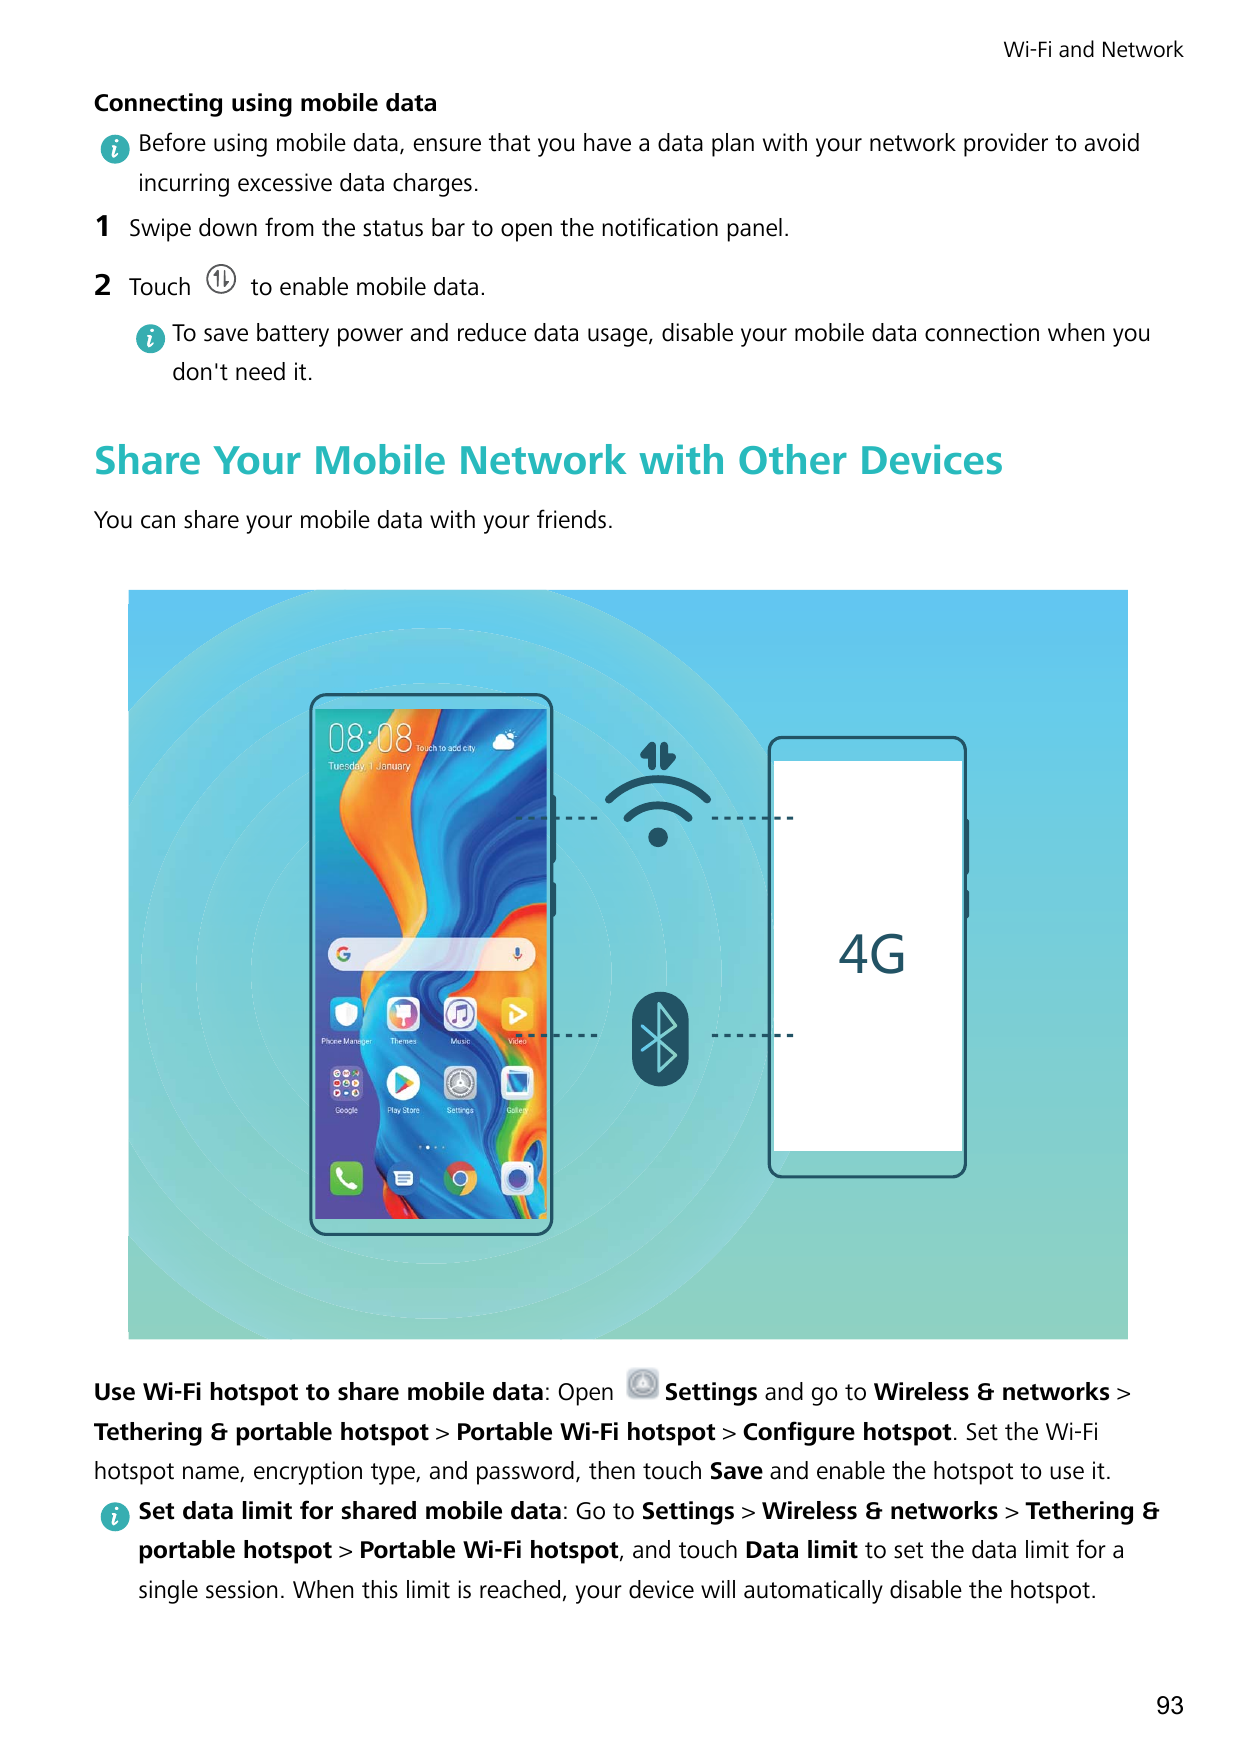 Wi-Fi and NetworkConnecting using mobile dataBefore using mobile data, ensure that you have a data plan with your network provid